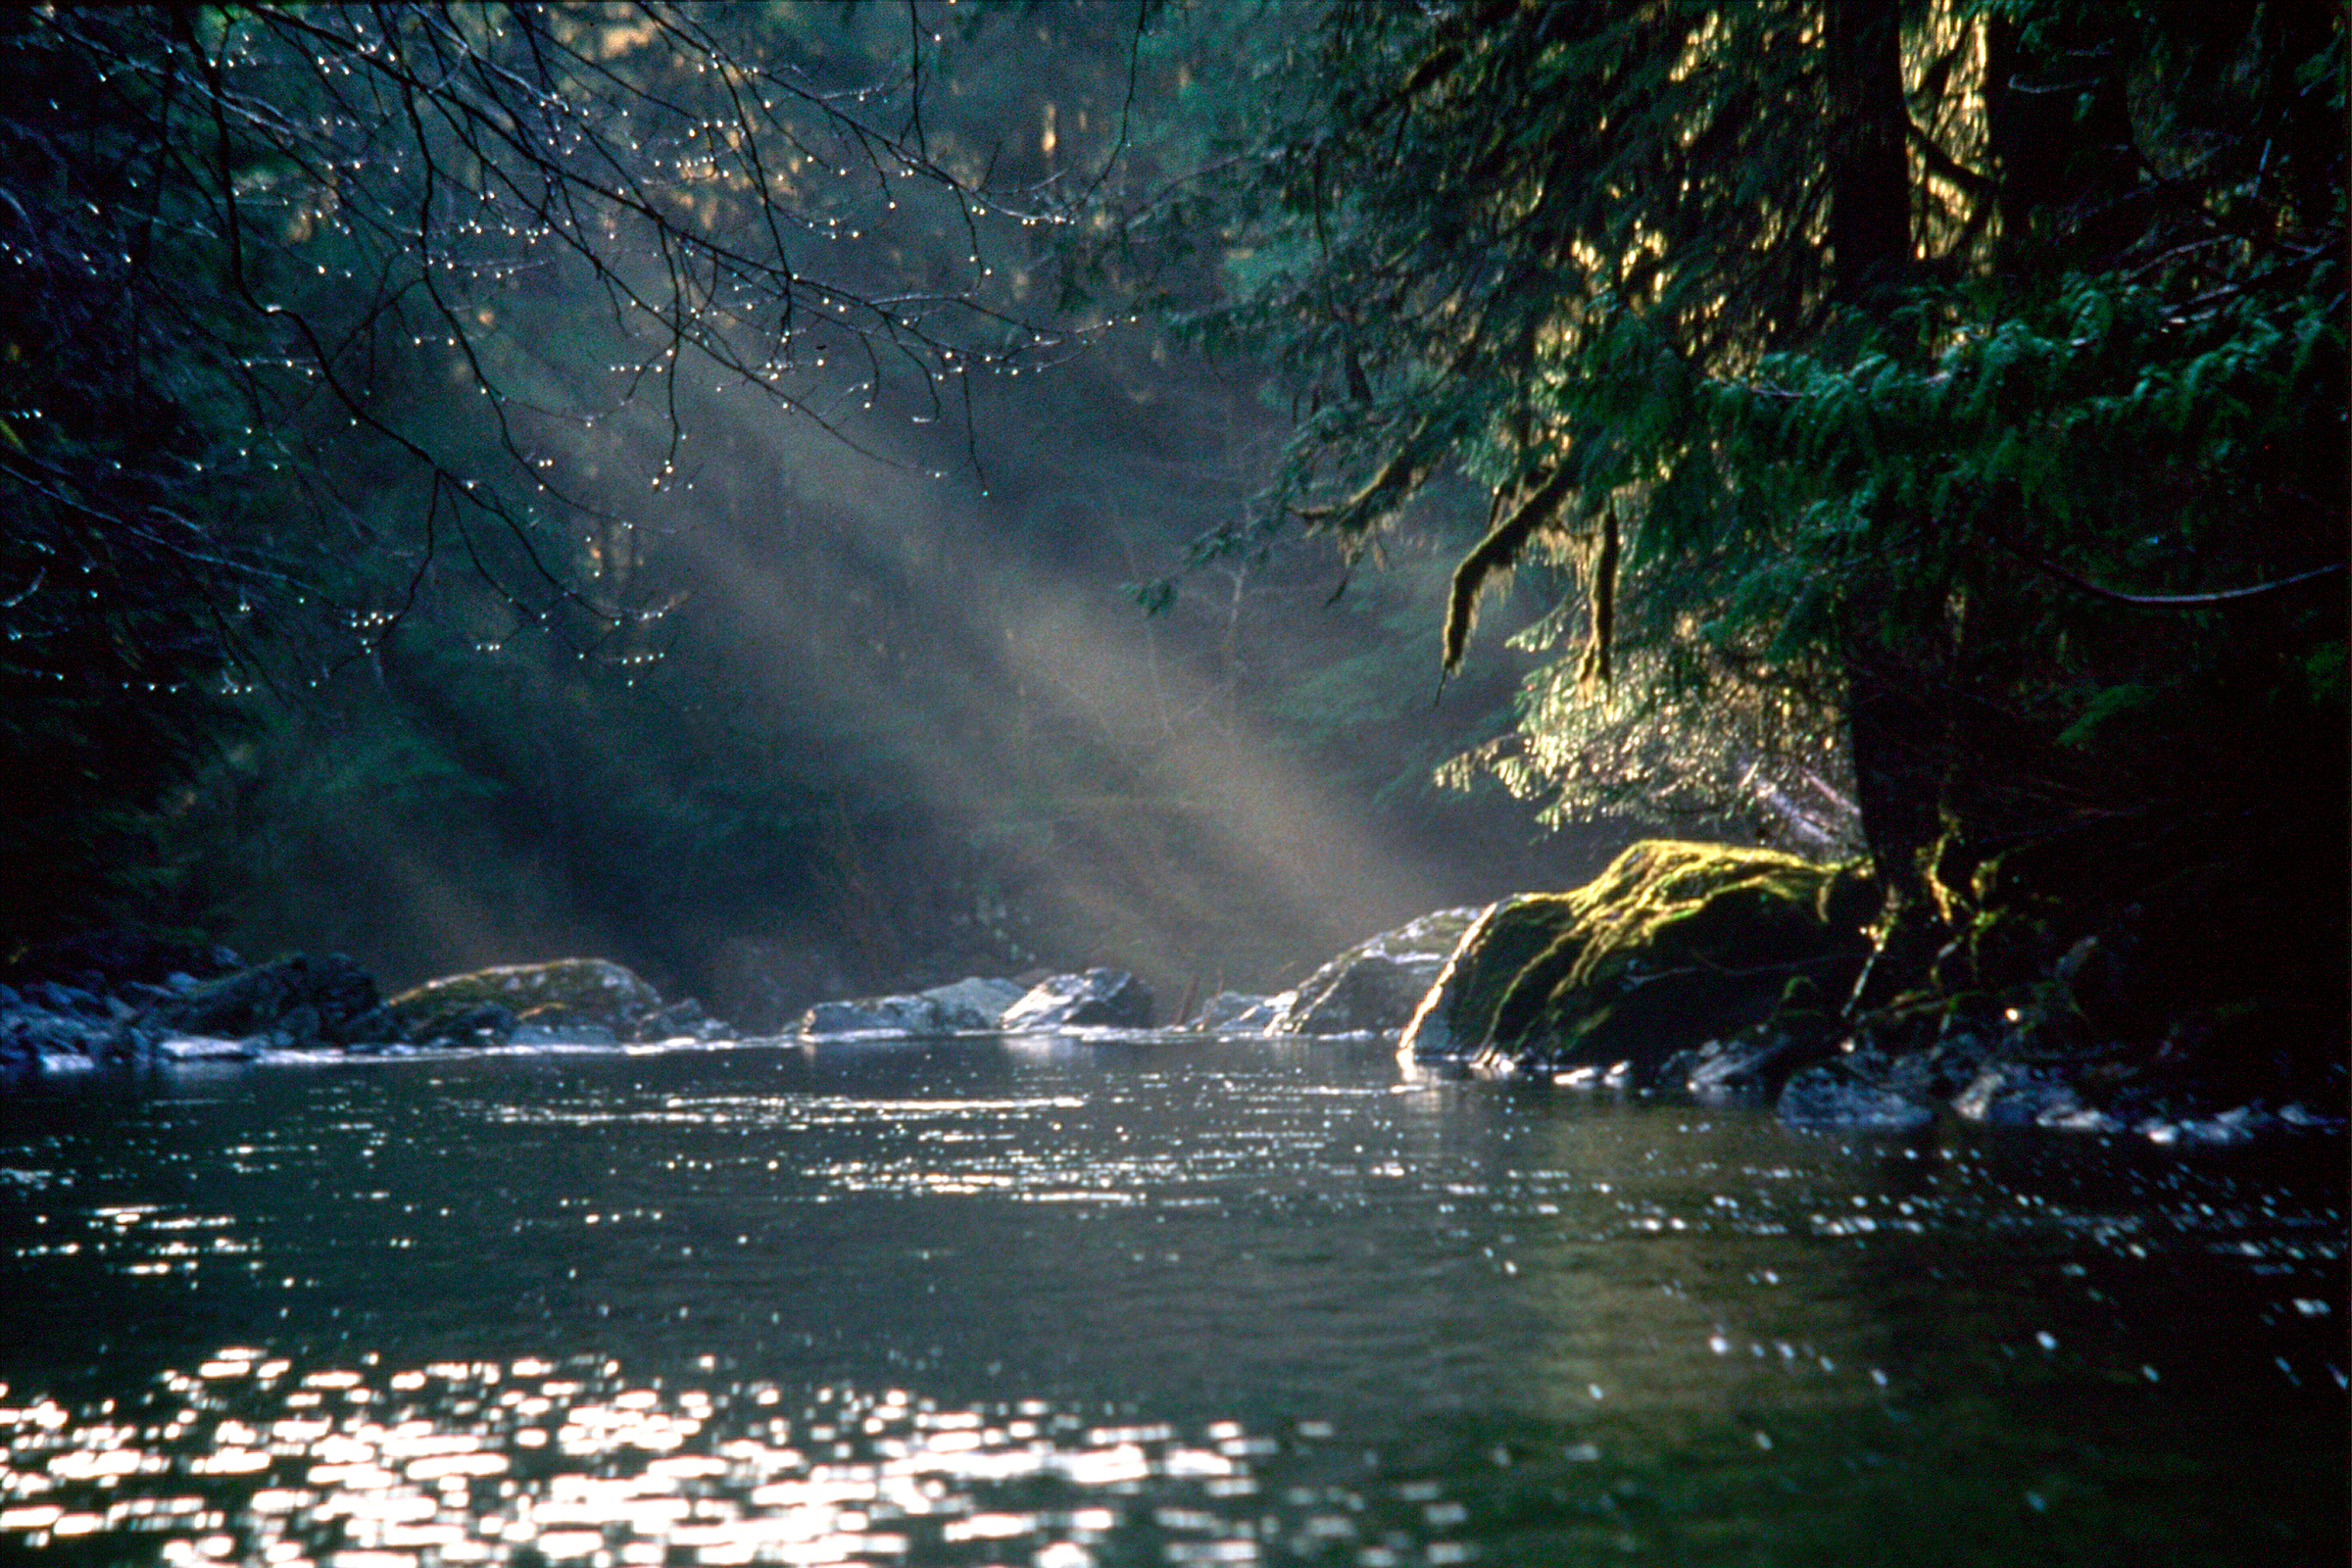 Sunlight over the stream and forest at Tofino Creek, British Columbia, Canada.